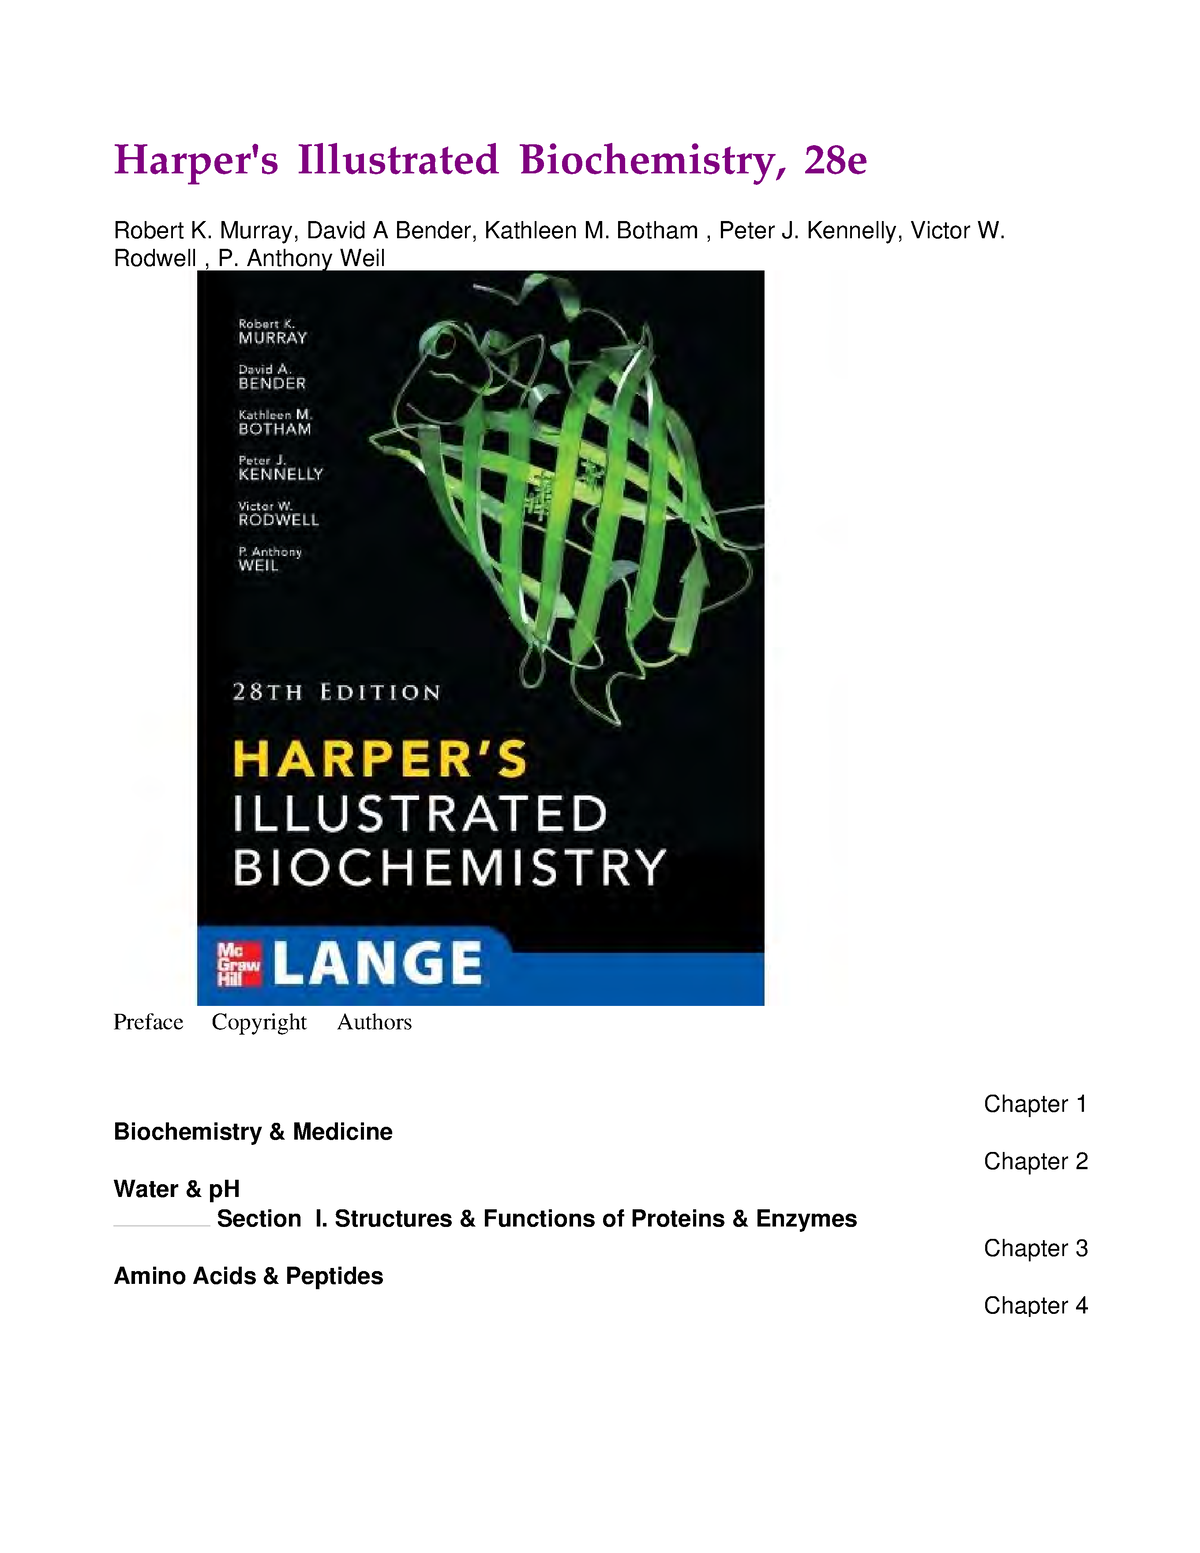 harpers illustrated biochemistry 28th edition pdf download